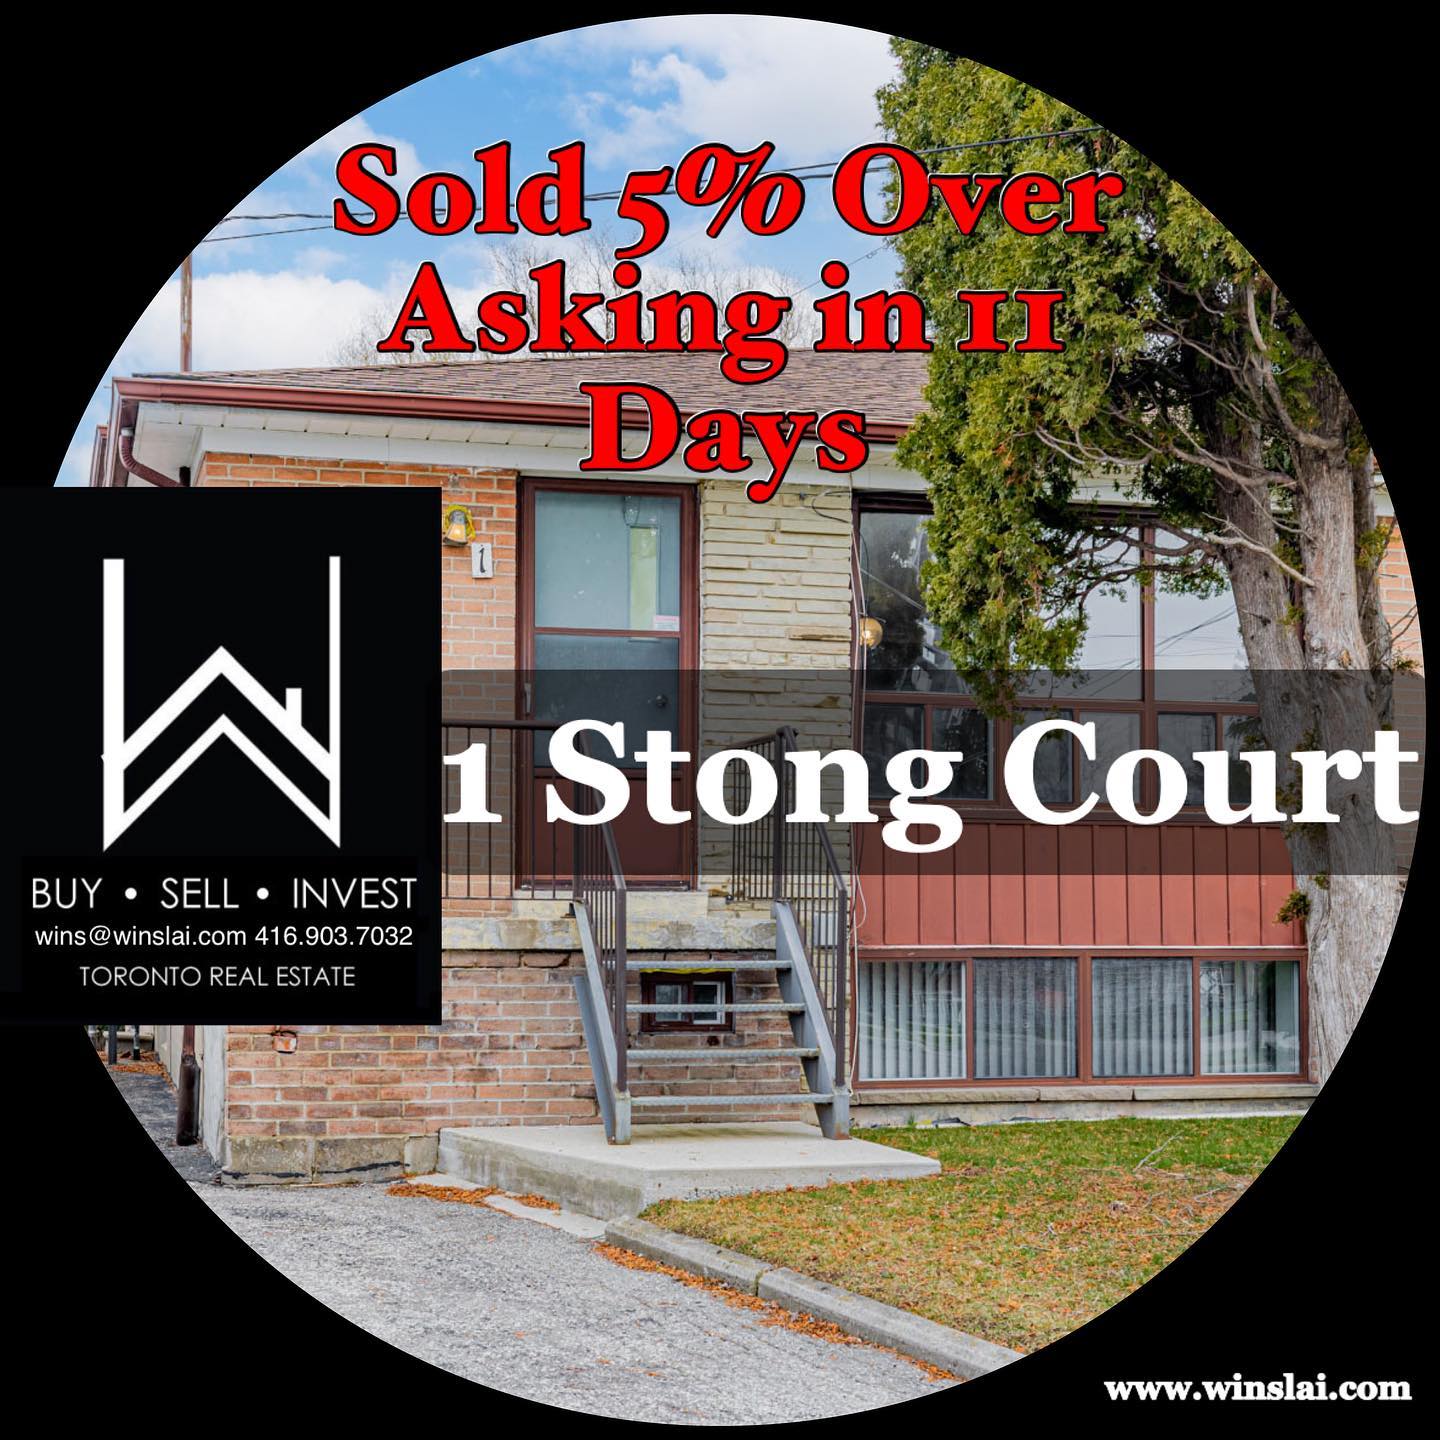 Sold 5% over asking in 11 days flyer.